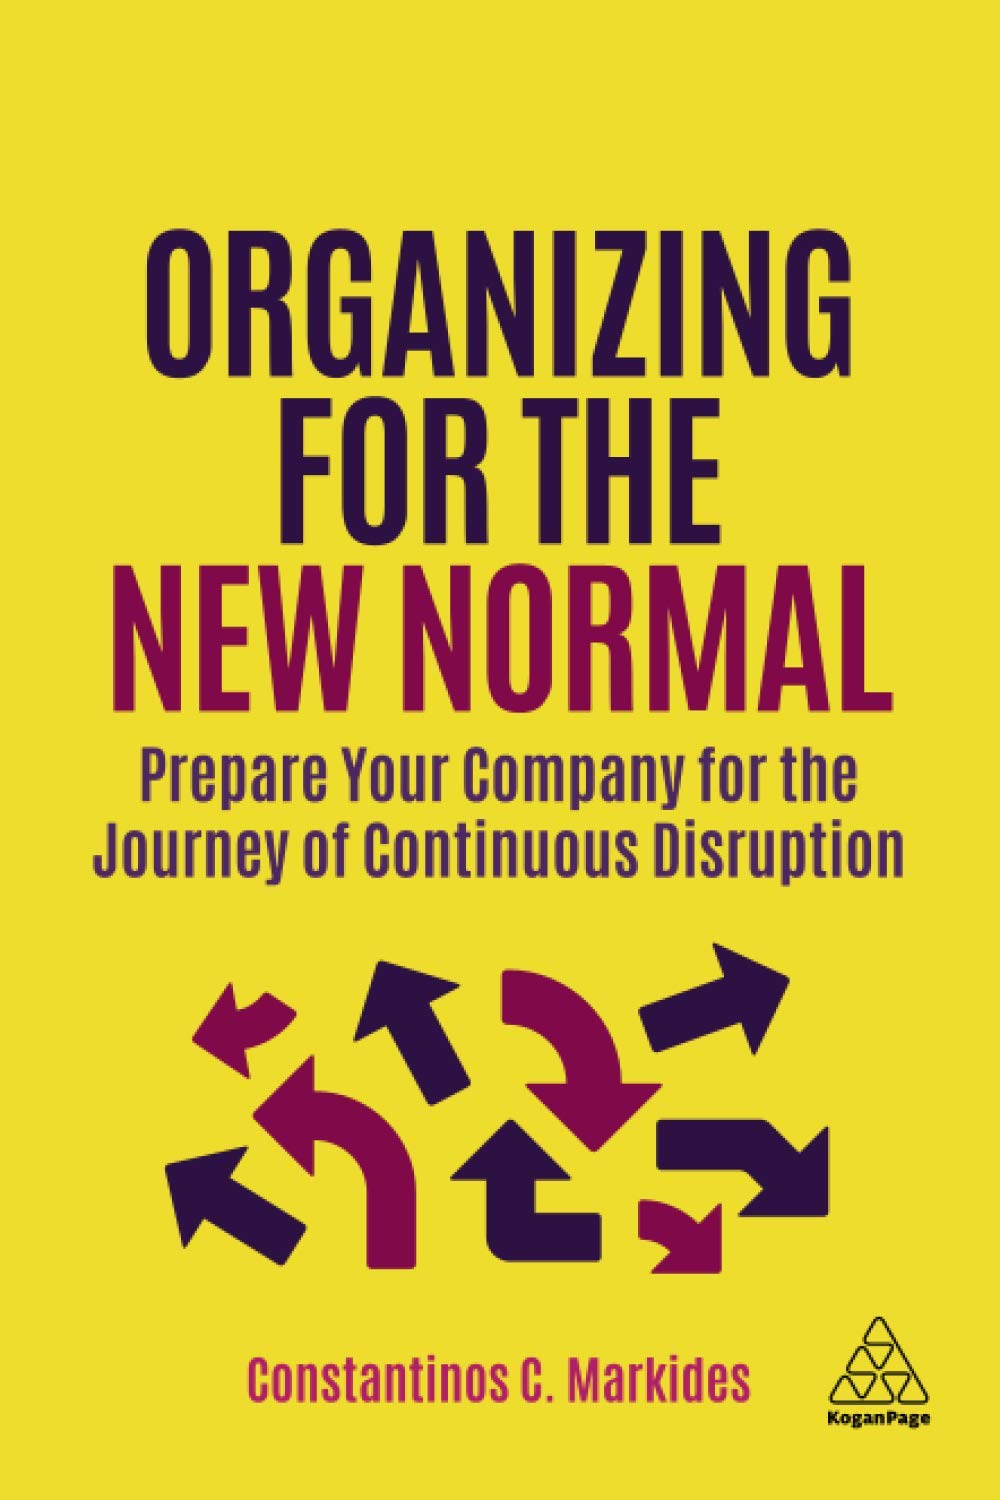 Organizing for the New Normal | Constantinos C. Markides